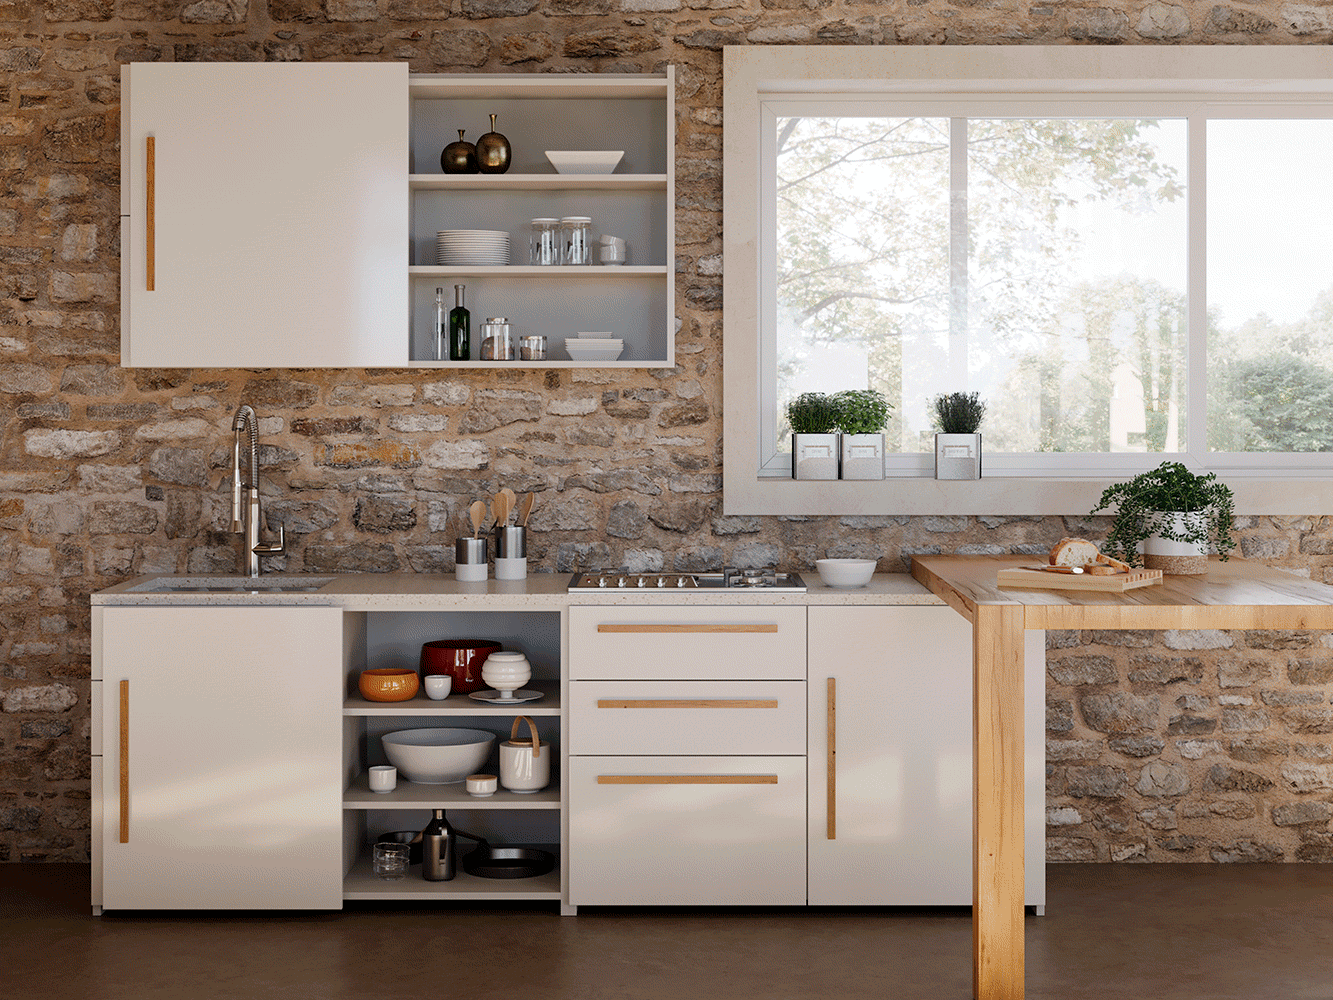 https://www.salice.com/media/immagini/773_n_coplanar-sliding-system-kitchen-and-small-wall-cabinets-slider-S10-IMG-H-GIF-02.gif